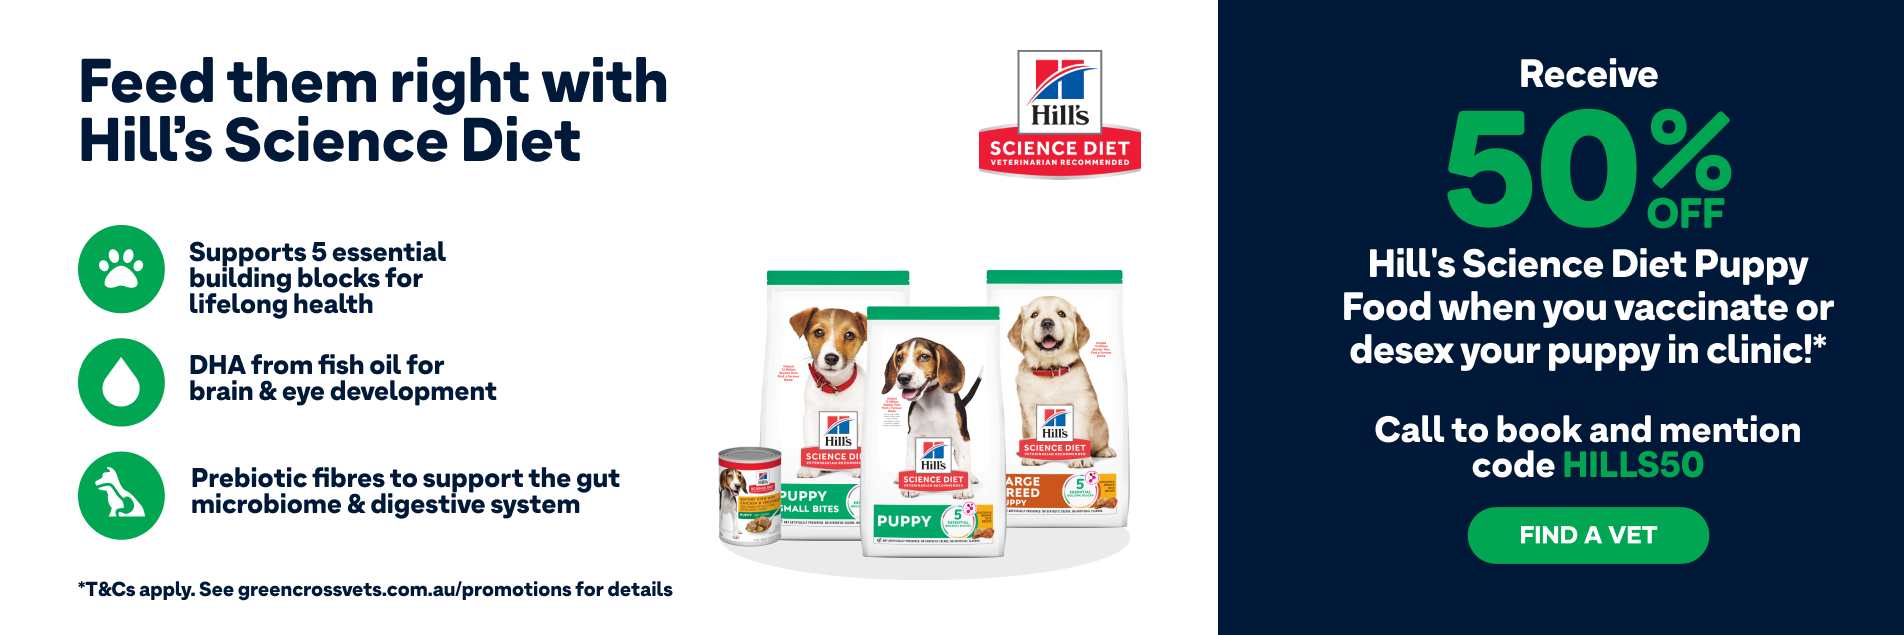 50% off Hill's Science Diet Puppy Food when you vaccinate or desex your puppy! Contact us